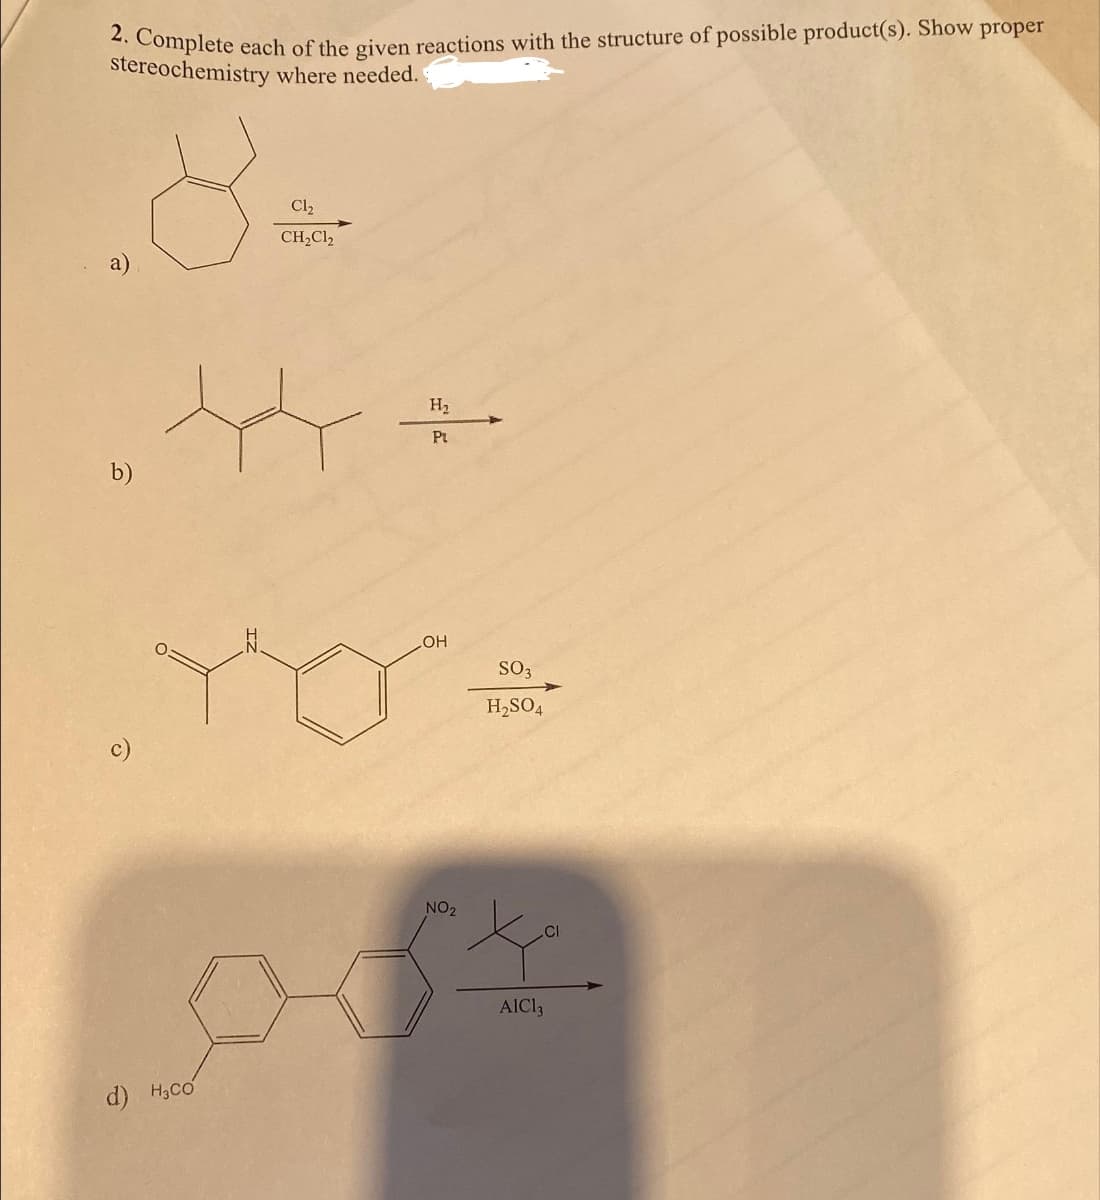 2. Complete each of the given reactions with the structure of possible product(s). Show proper
stereochemistry where needed.
.8
b)
d) H₂CO
C1₂
CH₂Cl2
H₂
Pt
LOH
NO 2
SO3
H₂SO4
.CI
AIC13